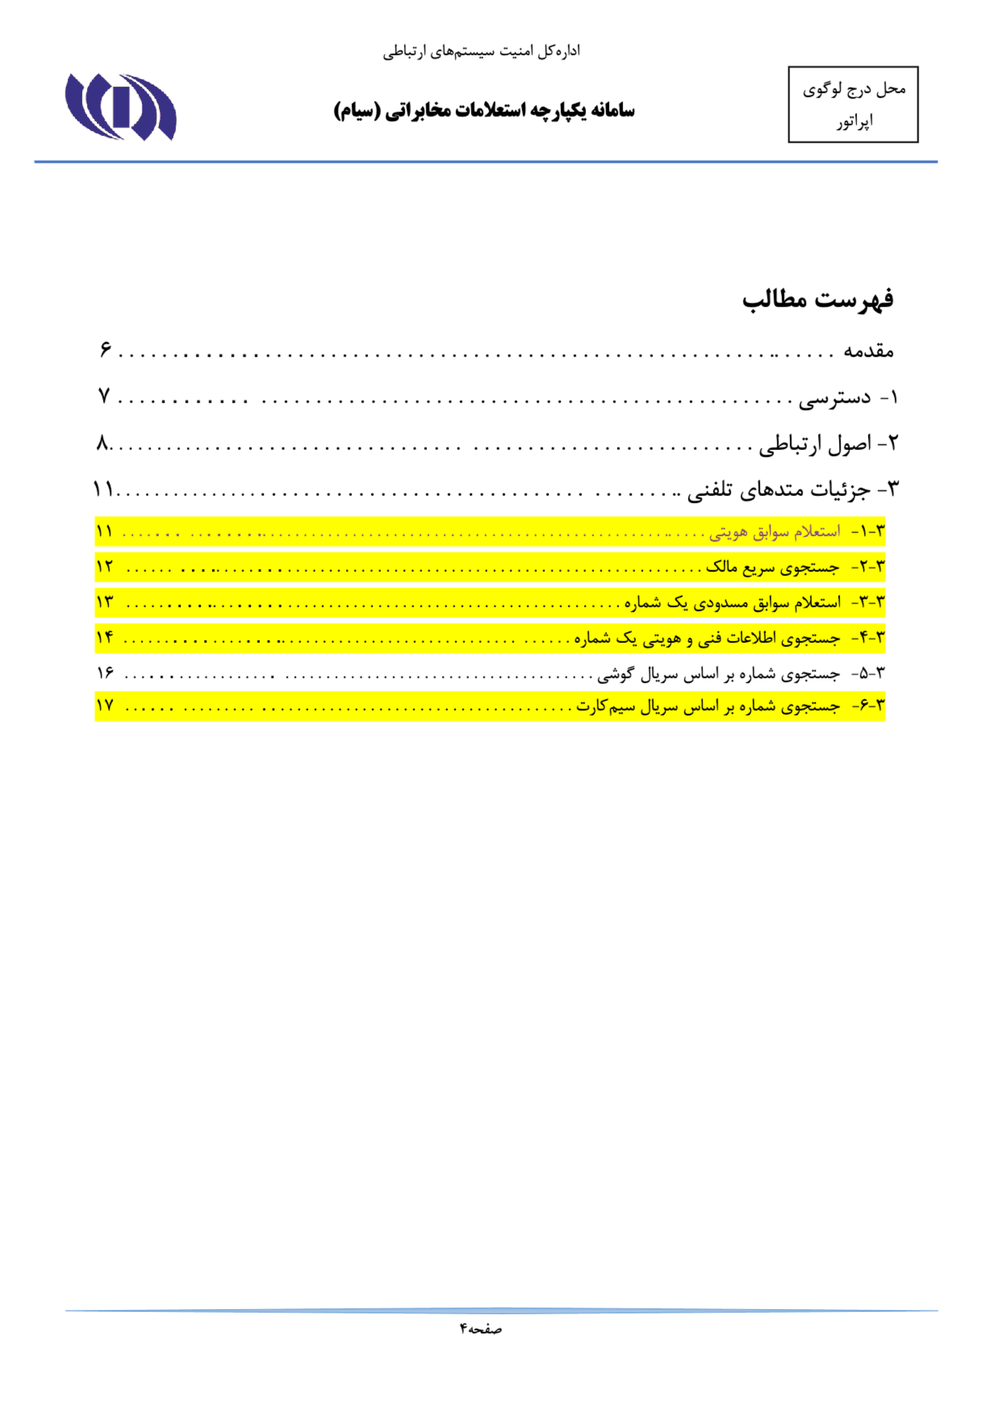 Page 4 from Iran’s SIAM Manual in Persian for Tracking and Controlling Mobile Phones